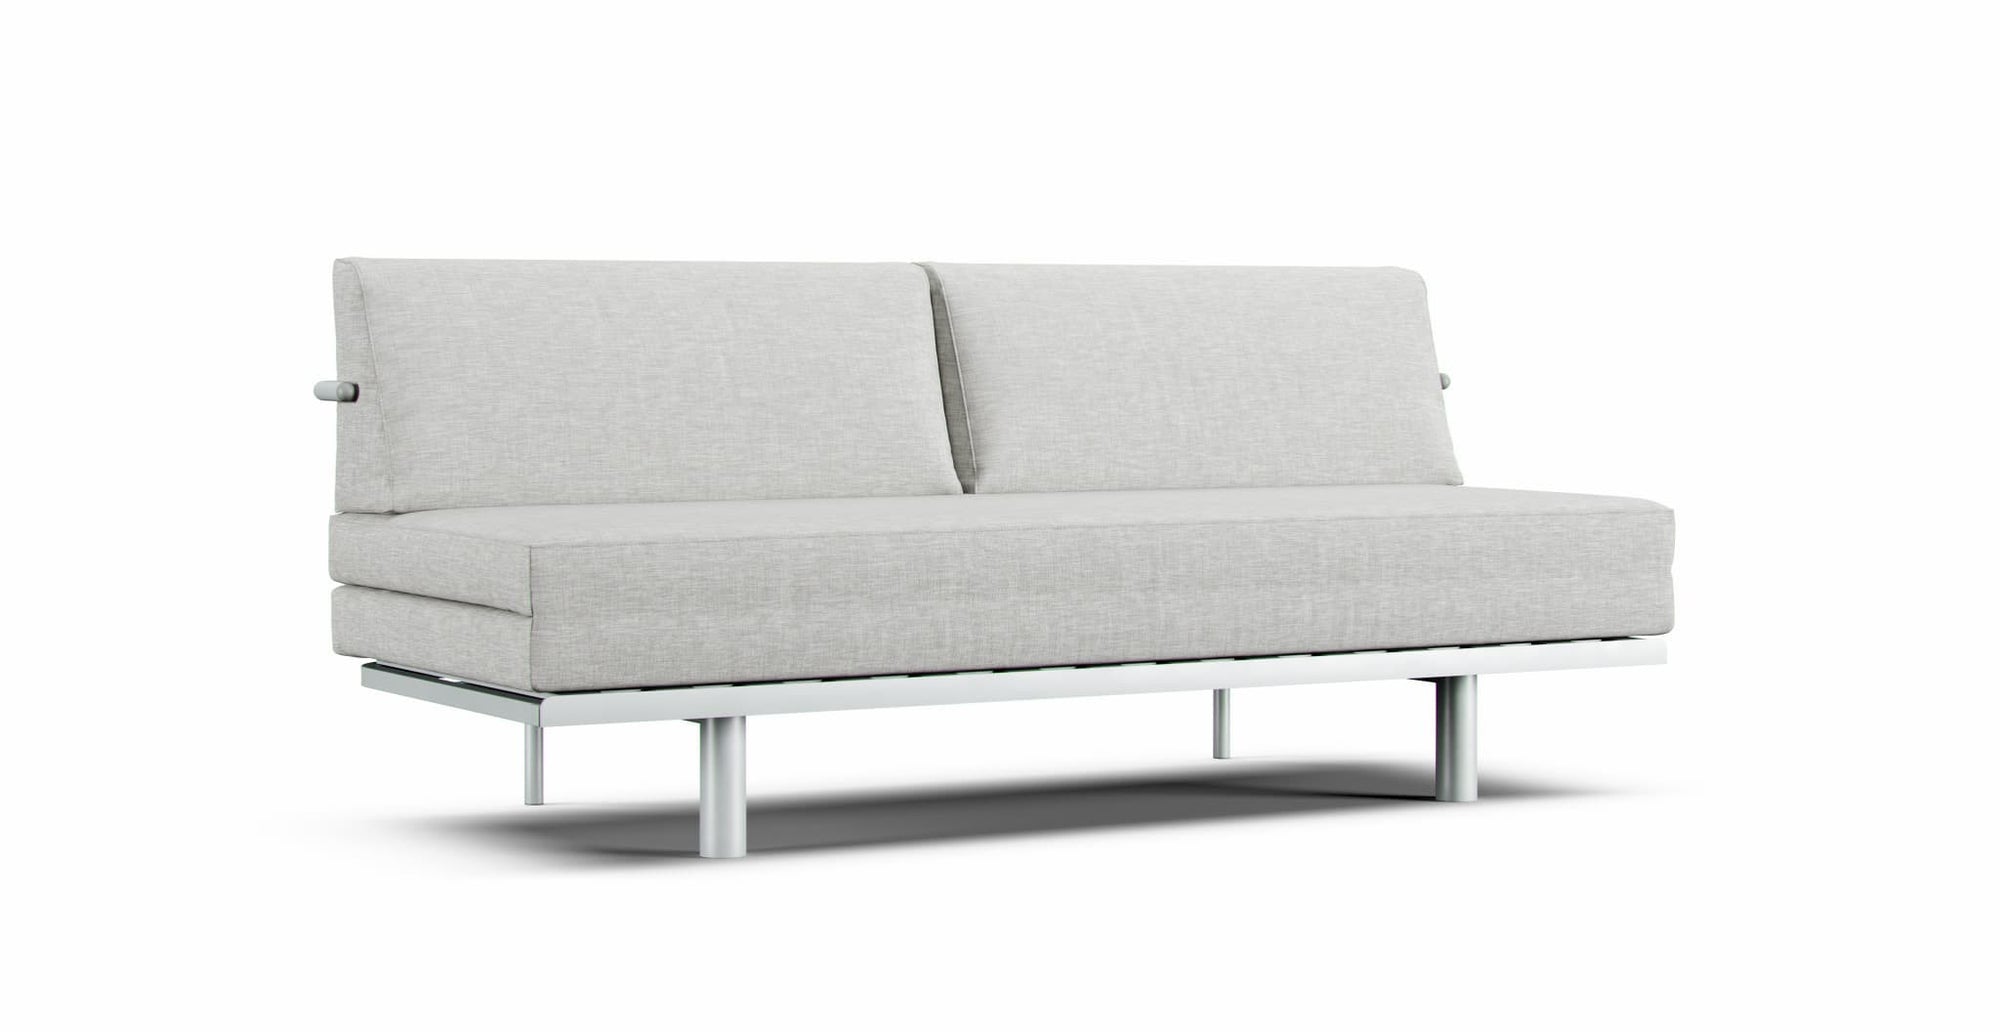 MUJI 3 Seater sofa bed featuring Textured Weave Ash slipcover